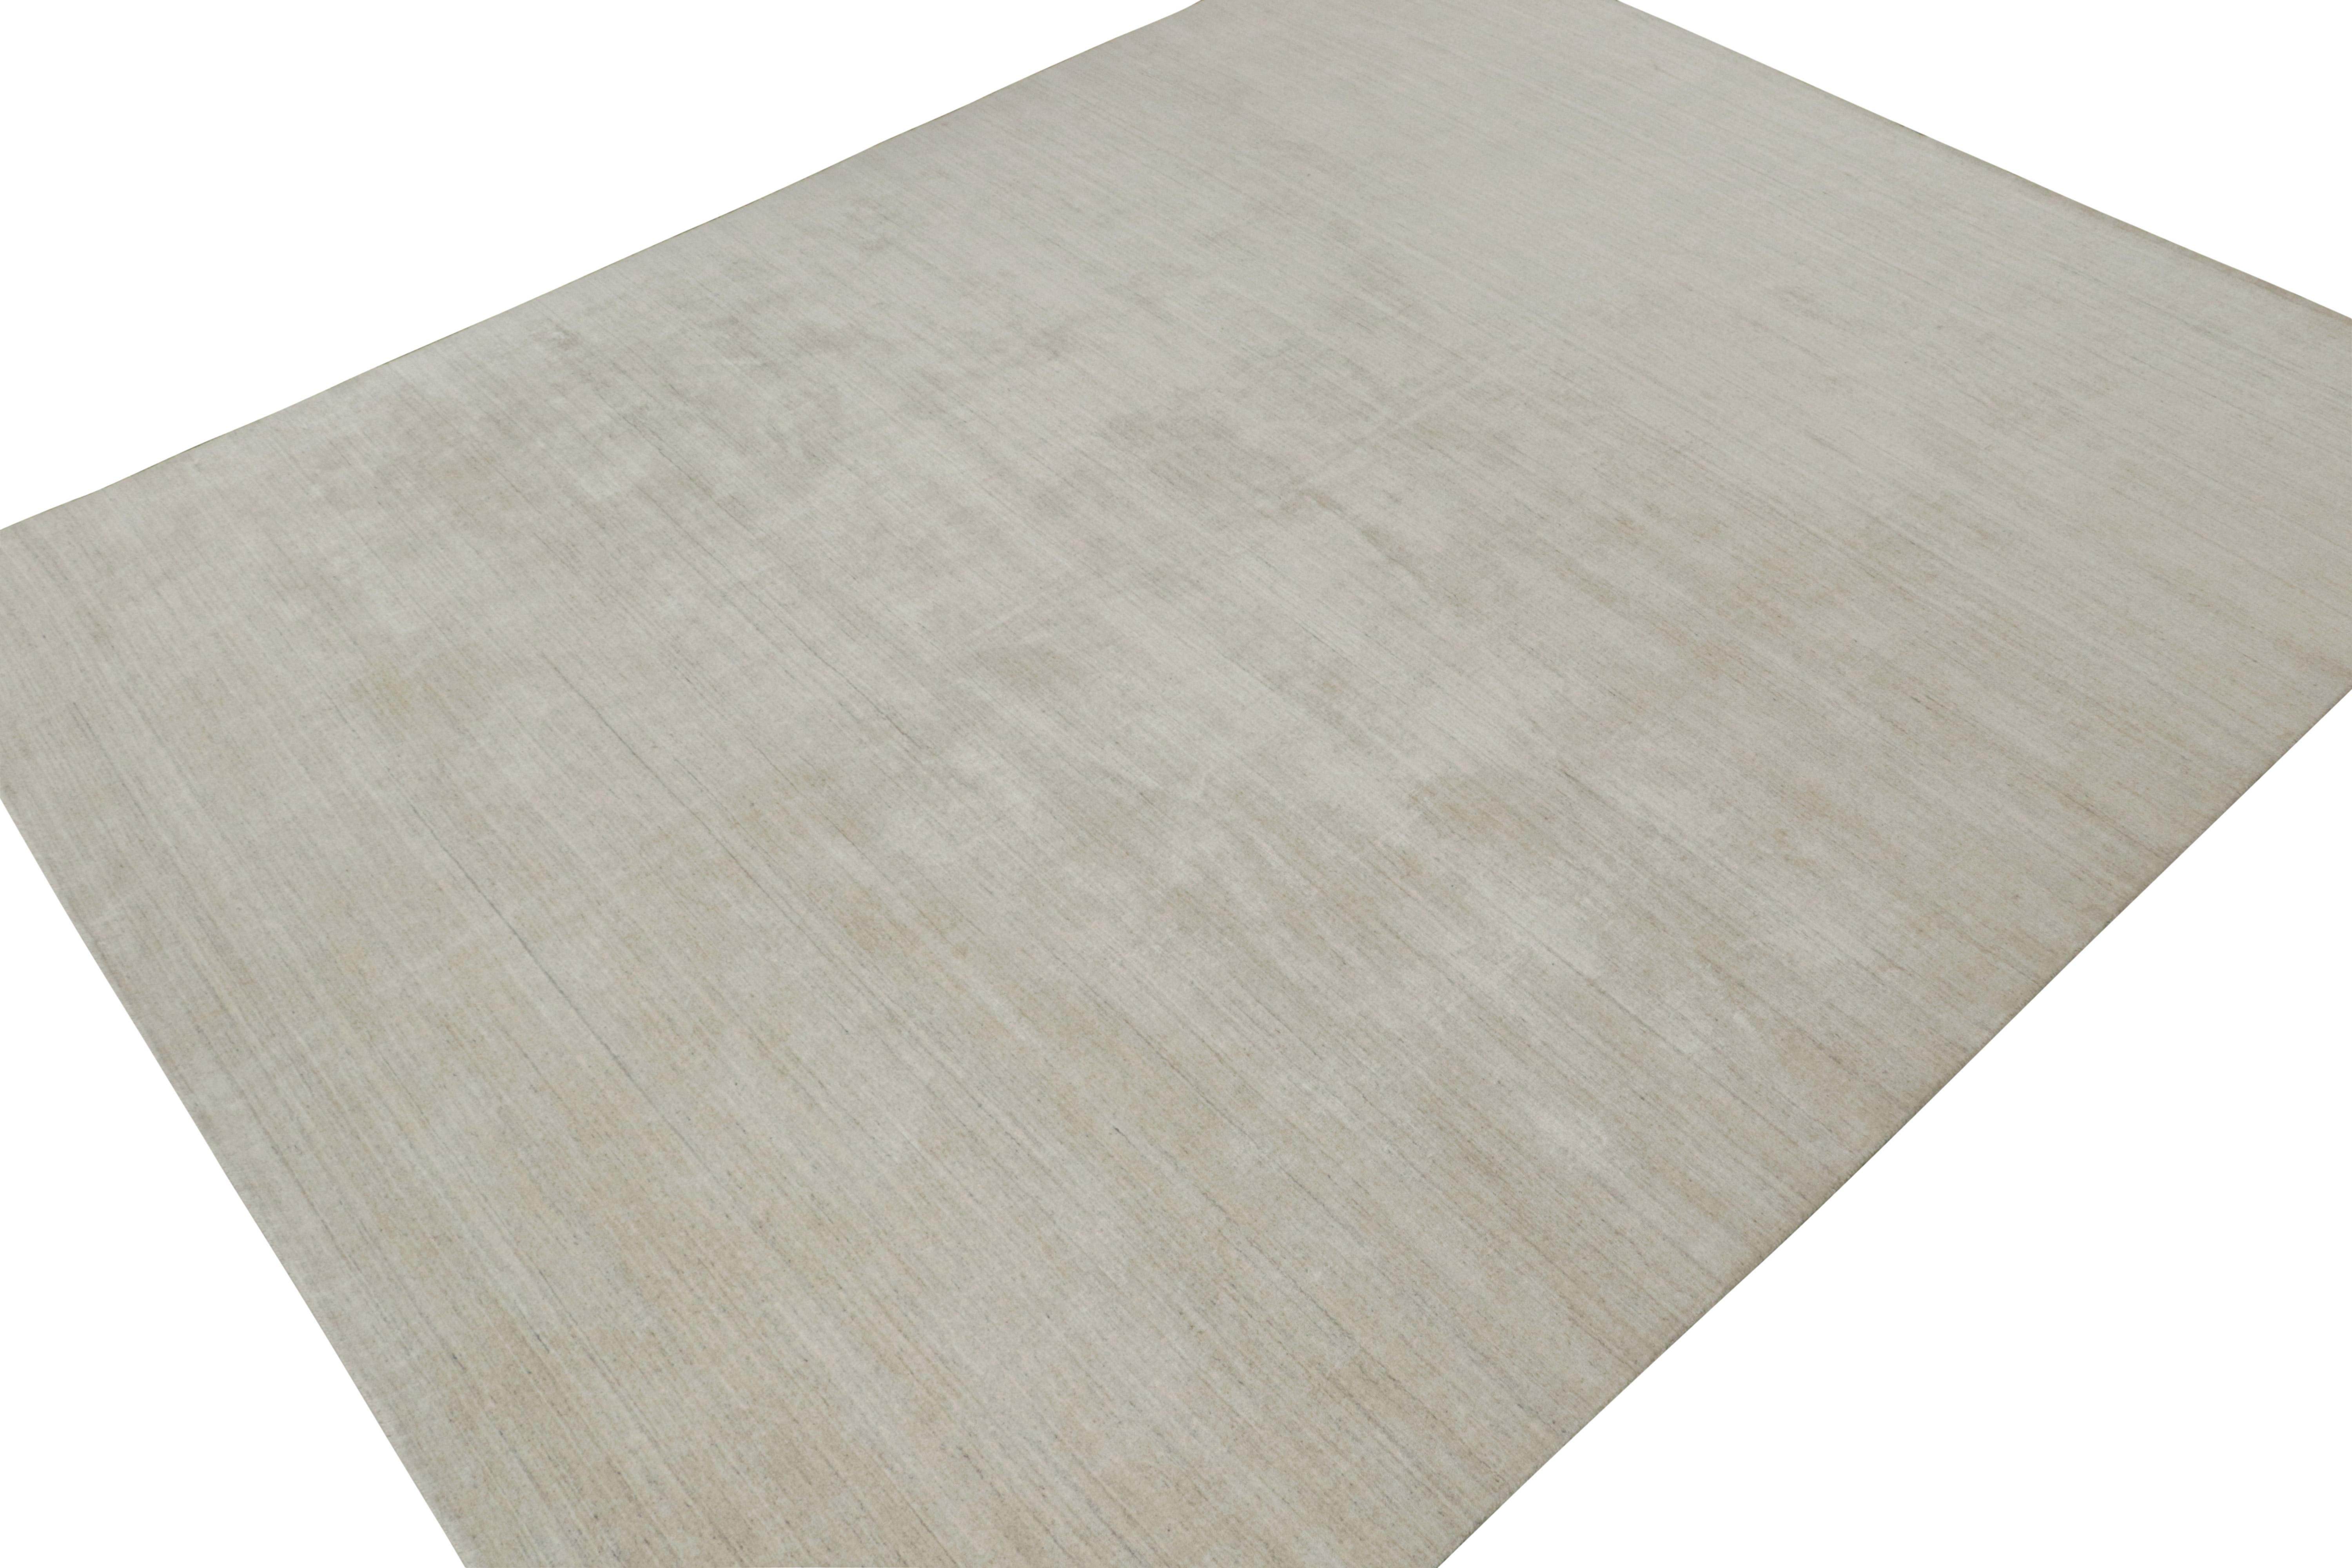 Indian Rug & Kilim’s Contemporary Rug in Solid Grey and Beige Tones For Sale